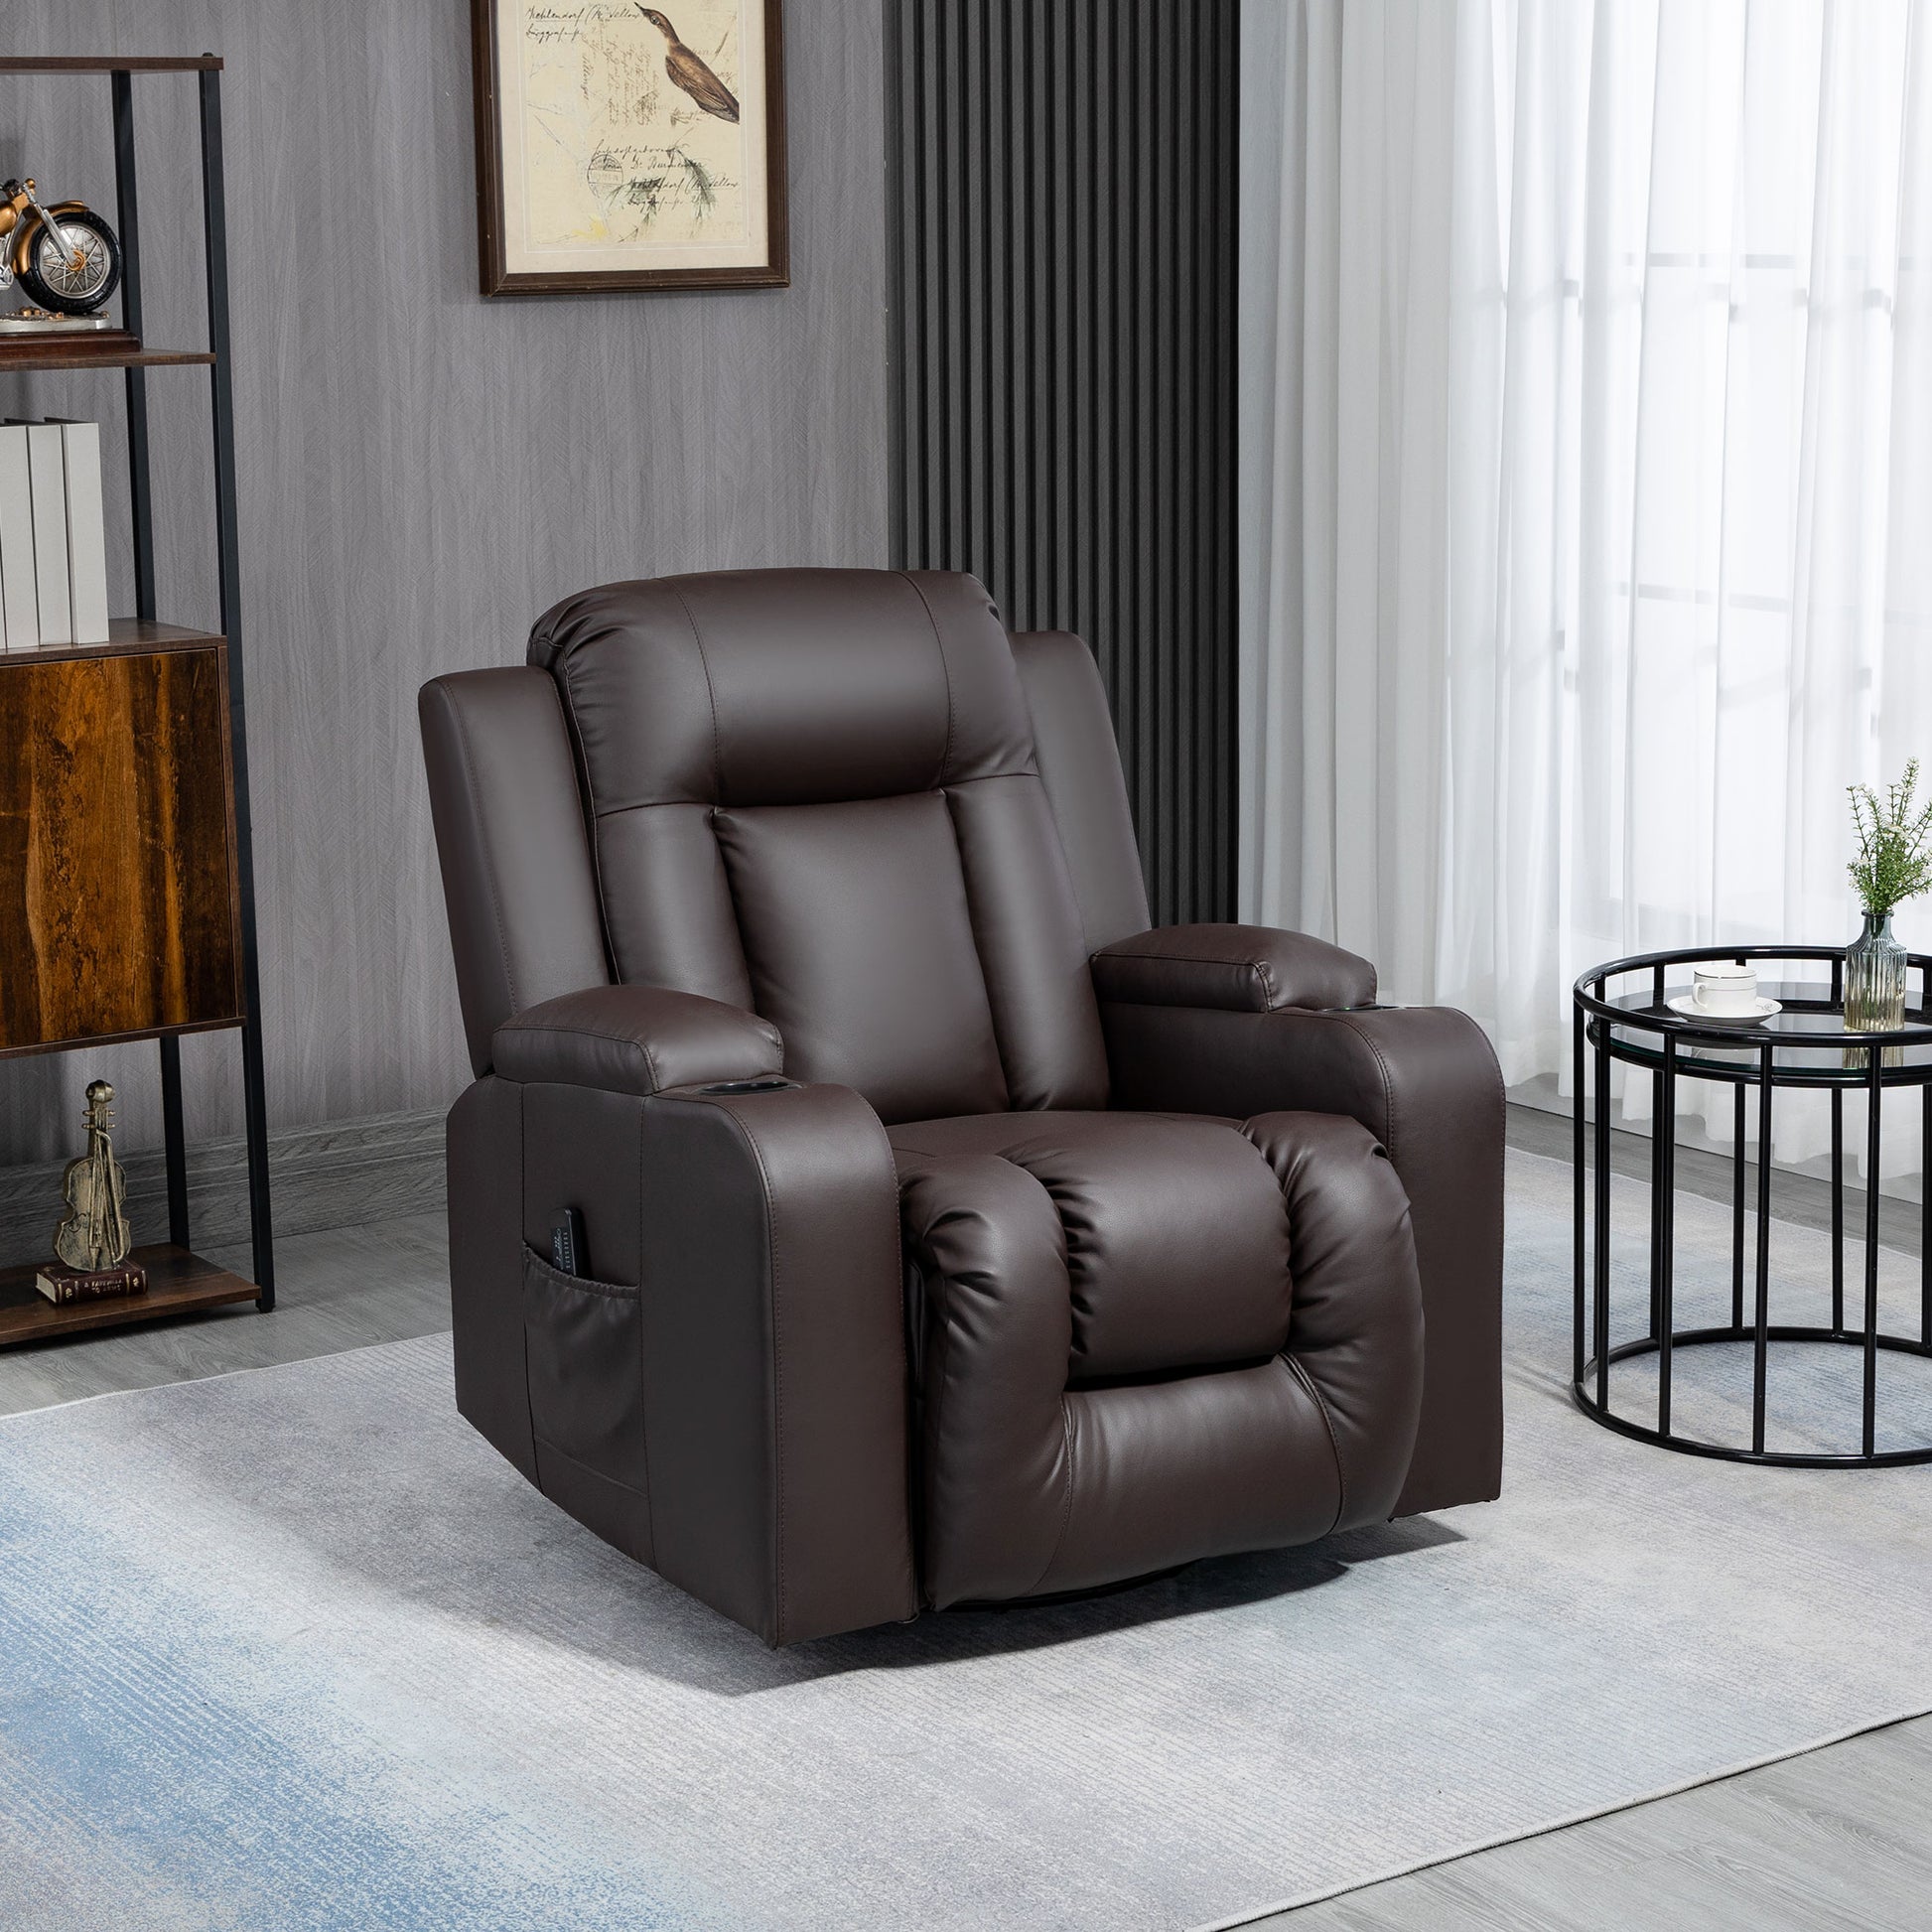 HOMCOM Swivel Rocker Recliner Chair for Living Room, PU Leather Reclining  Chair with 8 Vibration Massage, Remote Control, and Side Pockets, Black